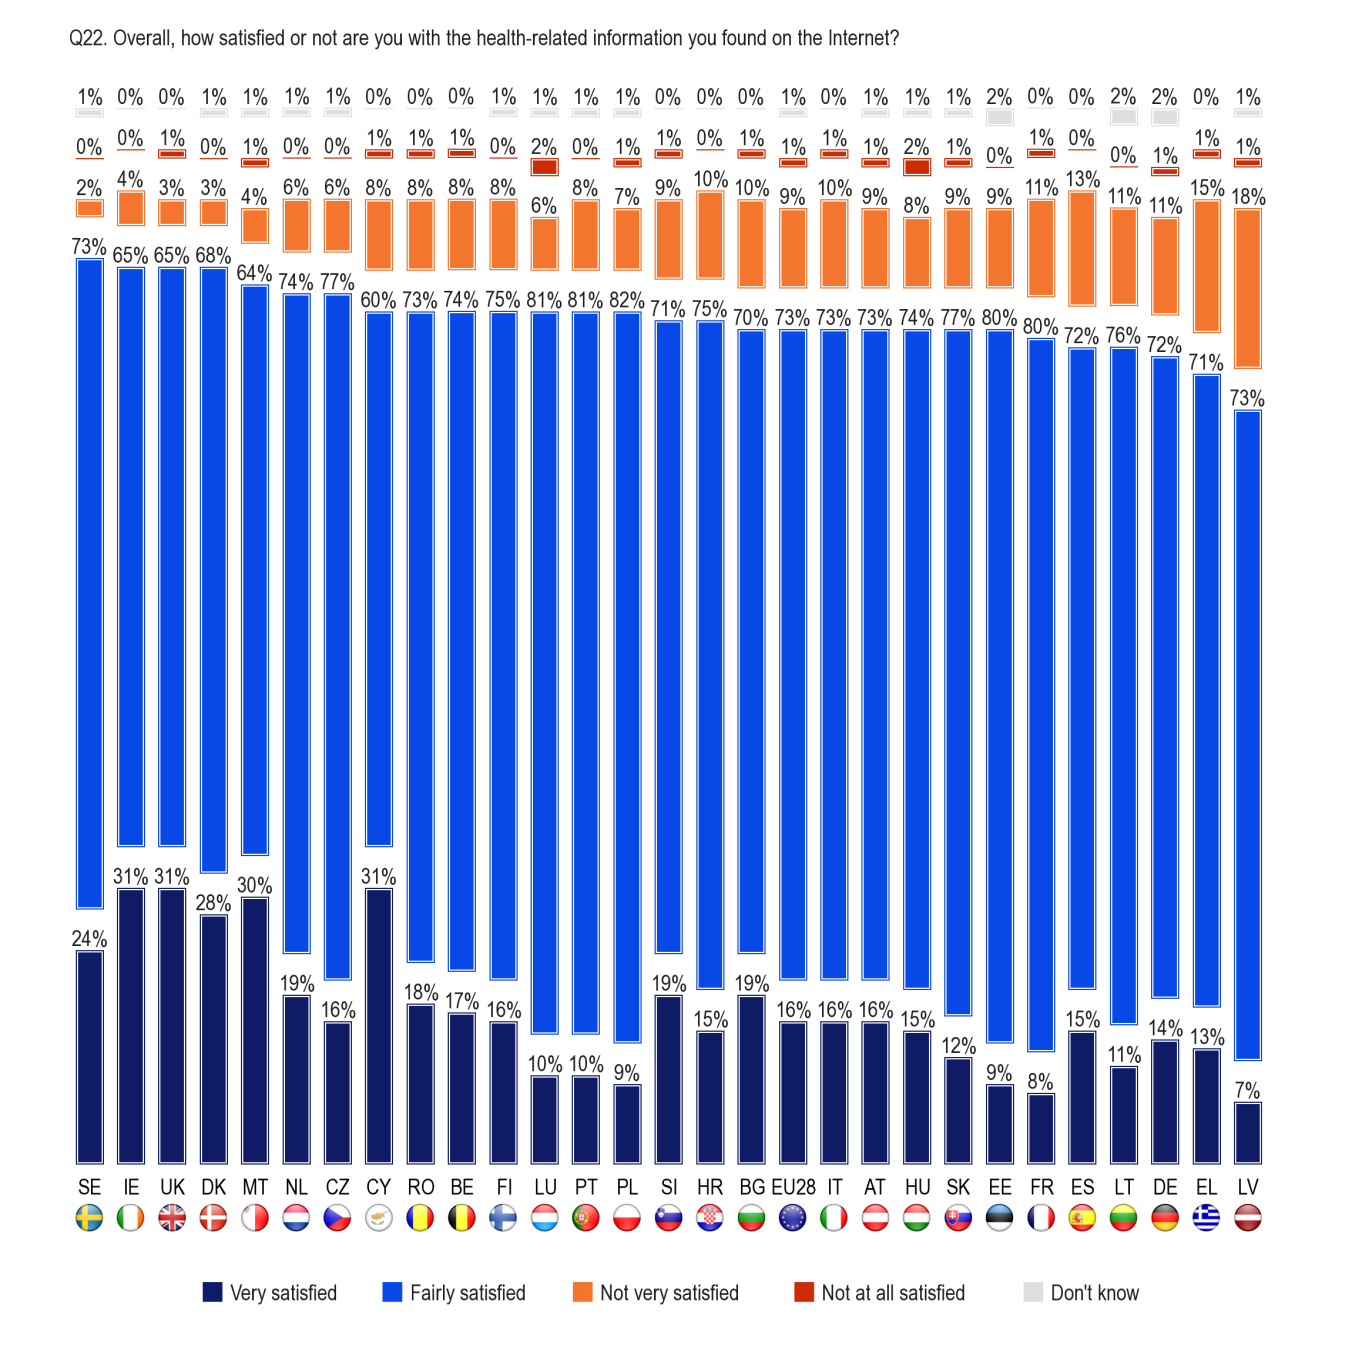 FLASH EUROBAROMETER Base: Respondents that used the Internet to search for health-related information within the last 12 months (N=15598) According to the socio-demographic data: No significant